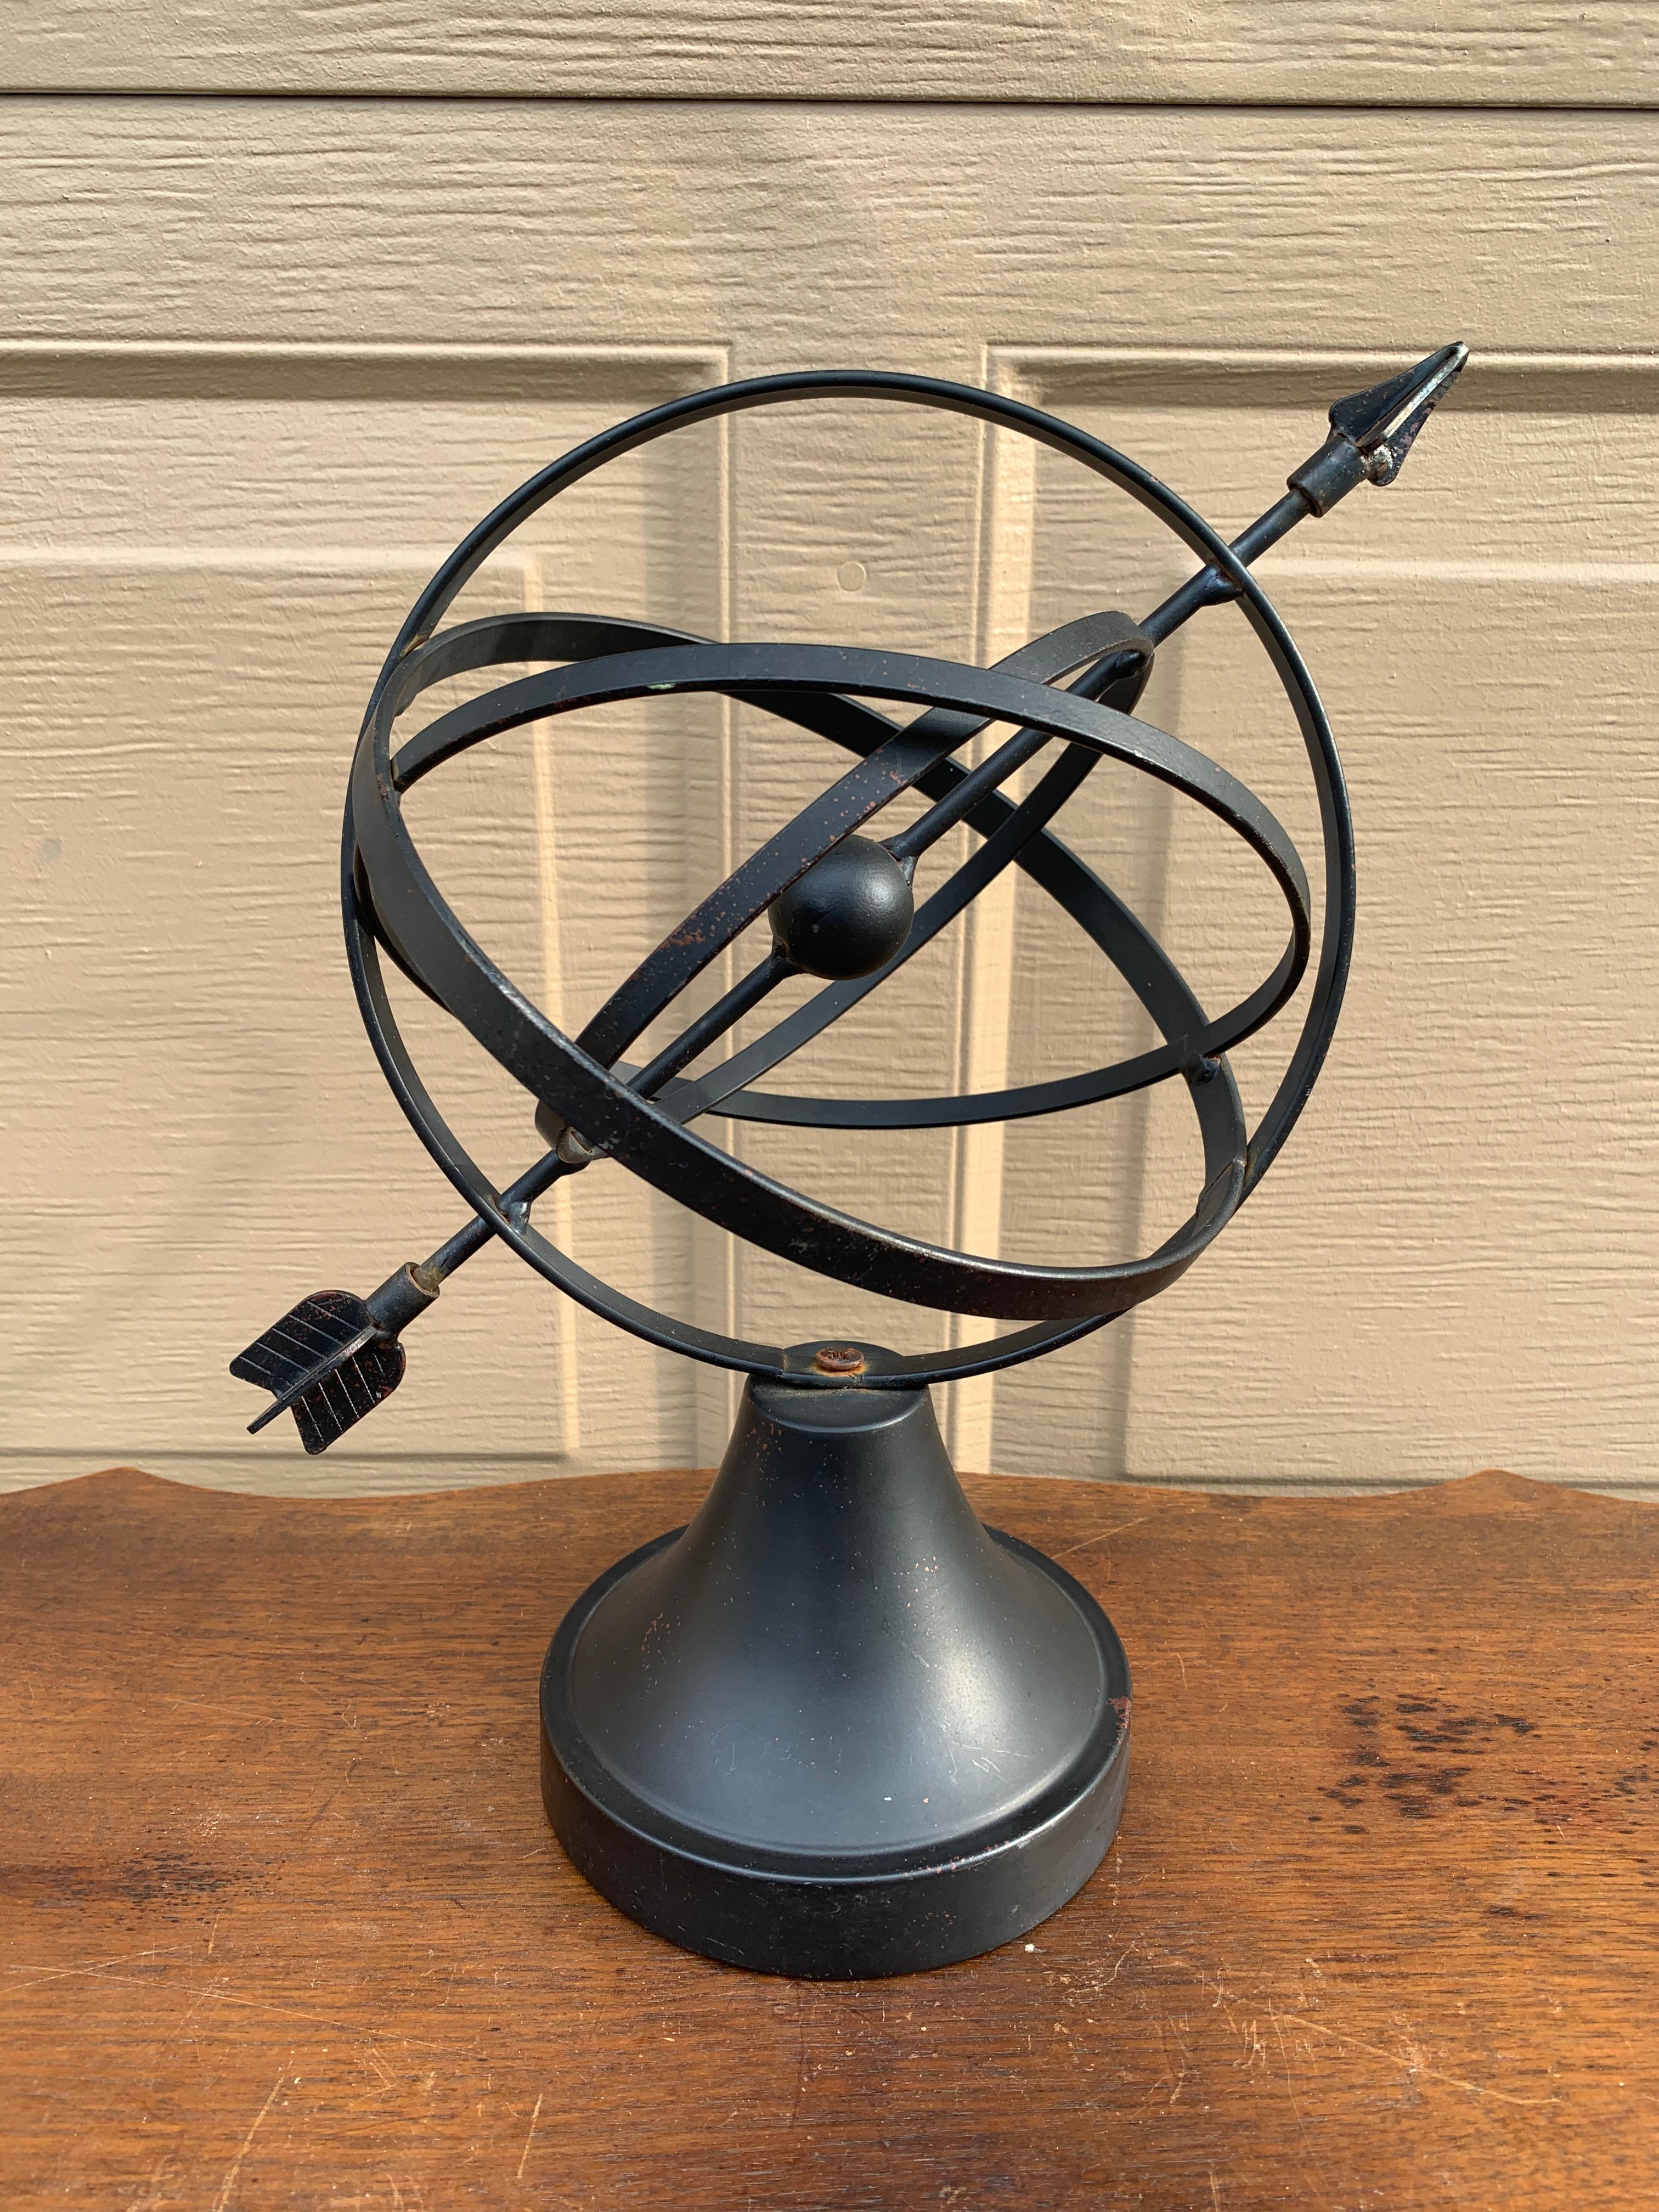 A stunning vintage English country or Neoclassical style black iron garden armillary sundial sphere

USA, Late 20th Century

Measures: 11